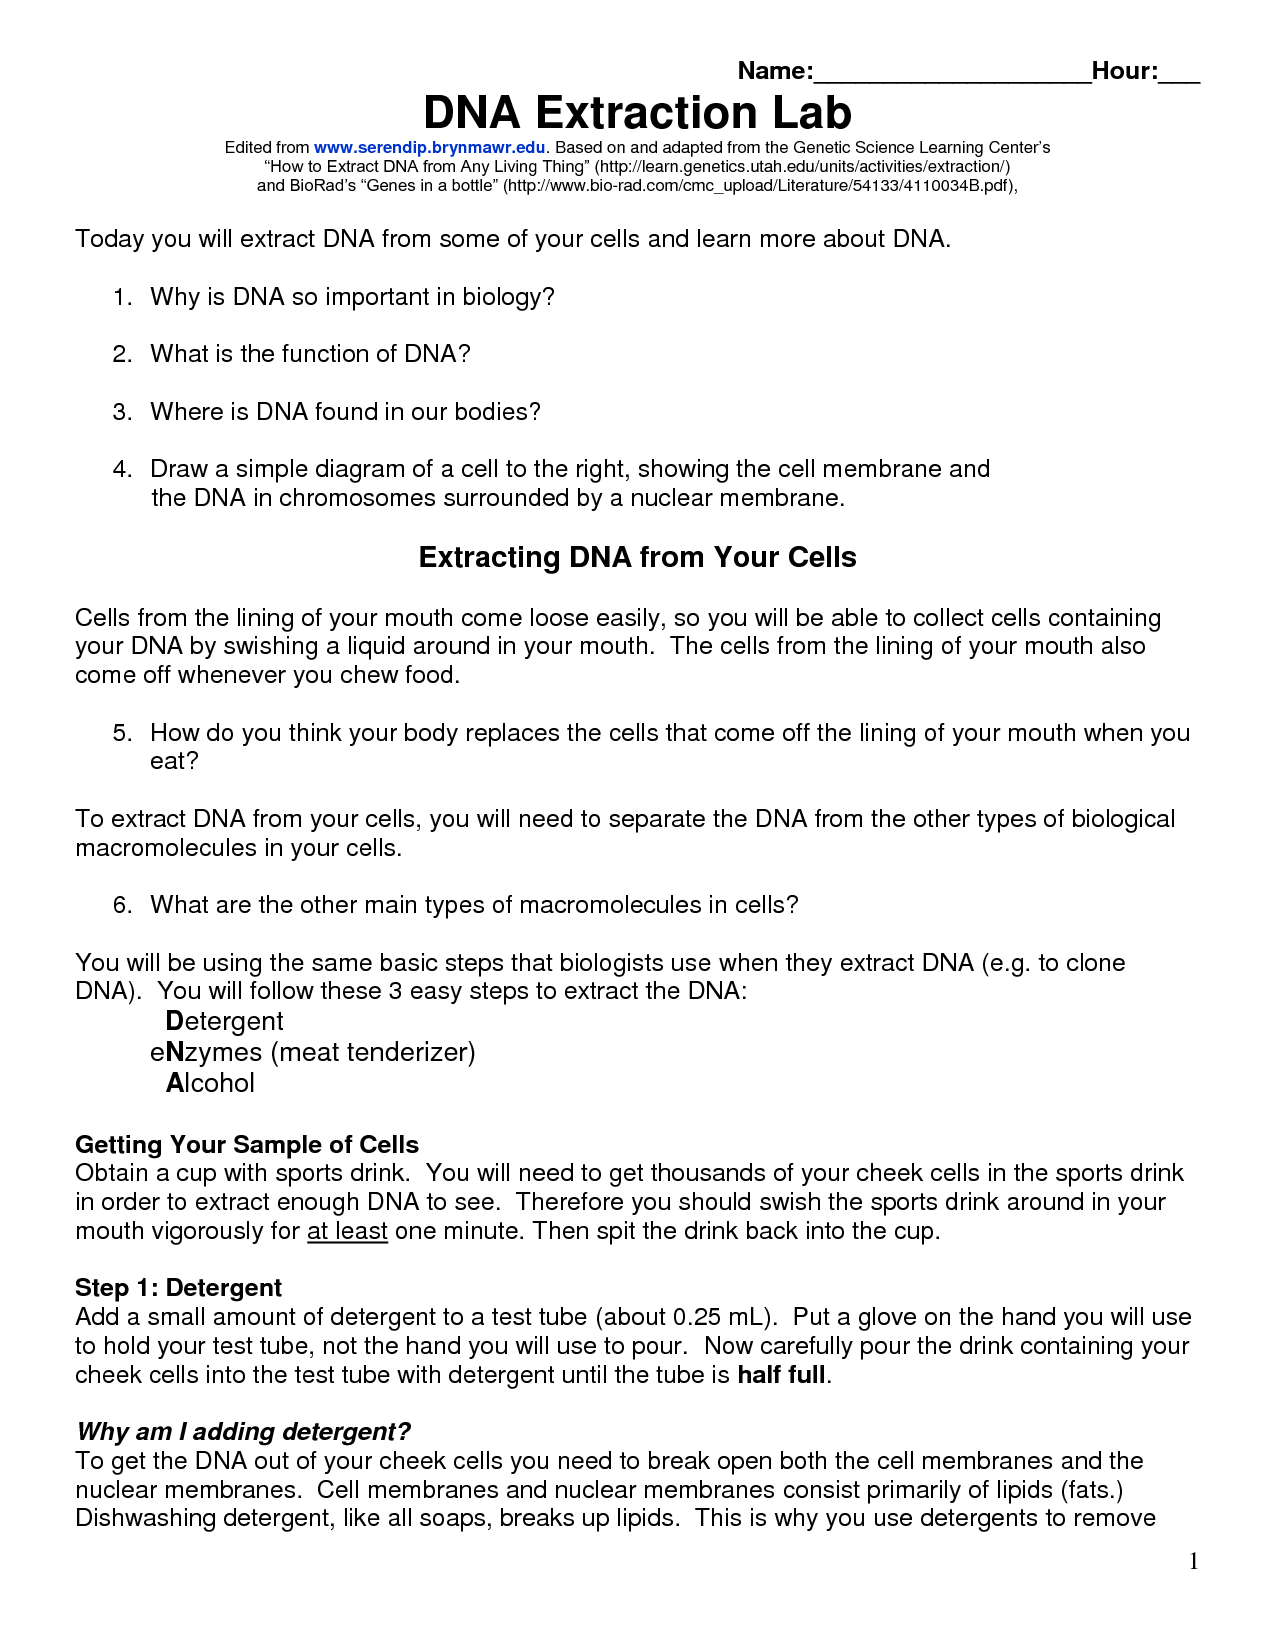 Dna Strawberry Extraction Lab Worksheet : 29 Strawberry Dna Extraction